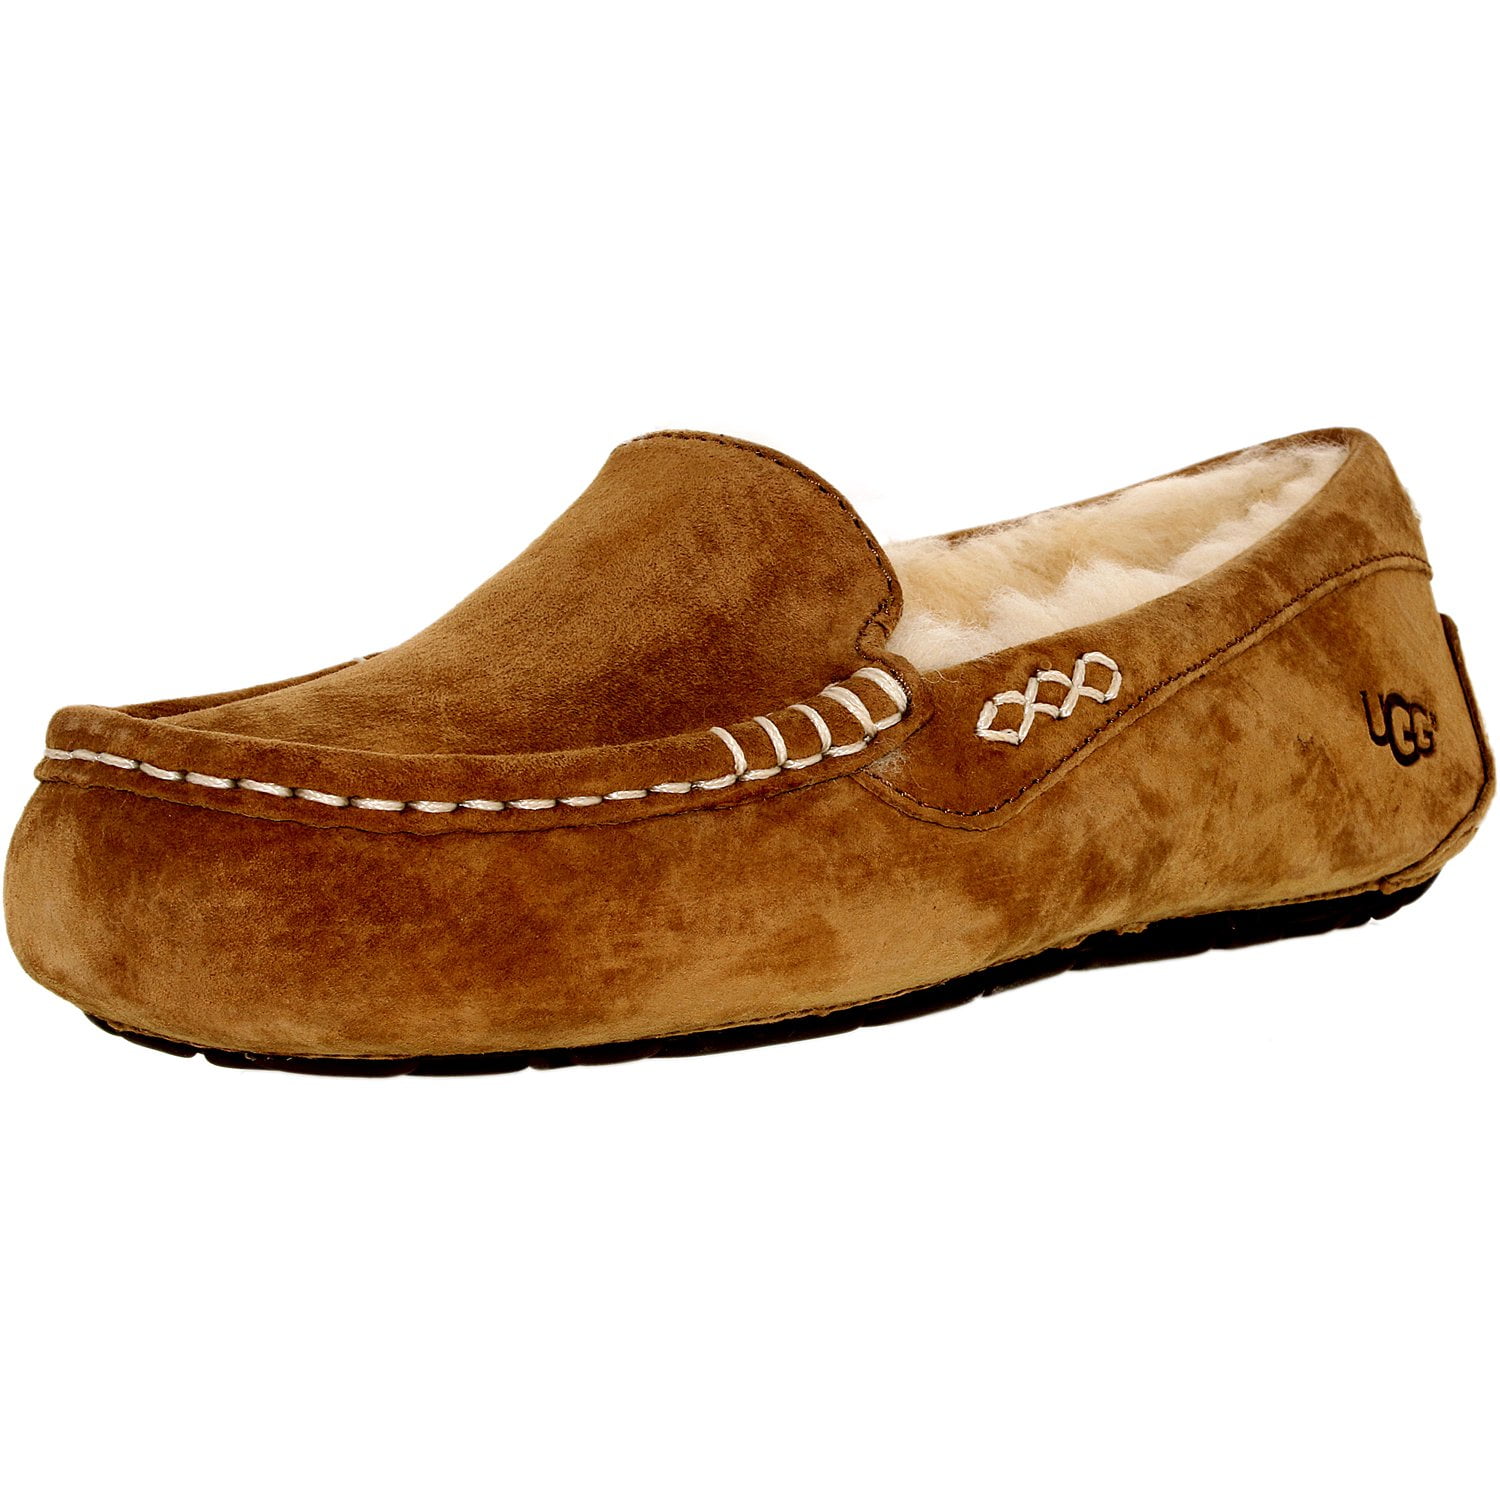 ugg ansley slippers canada